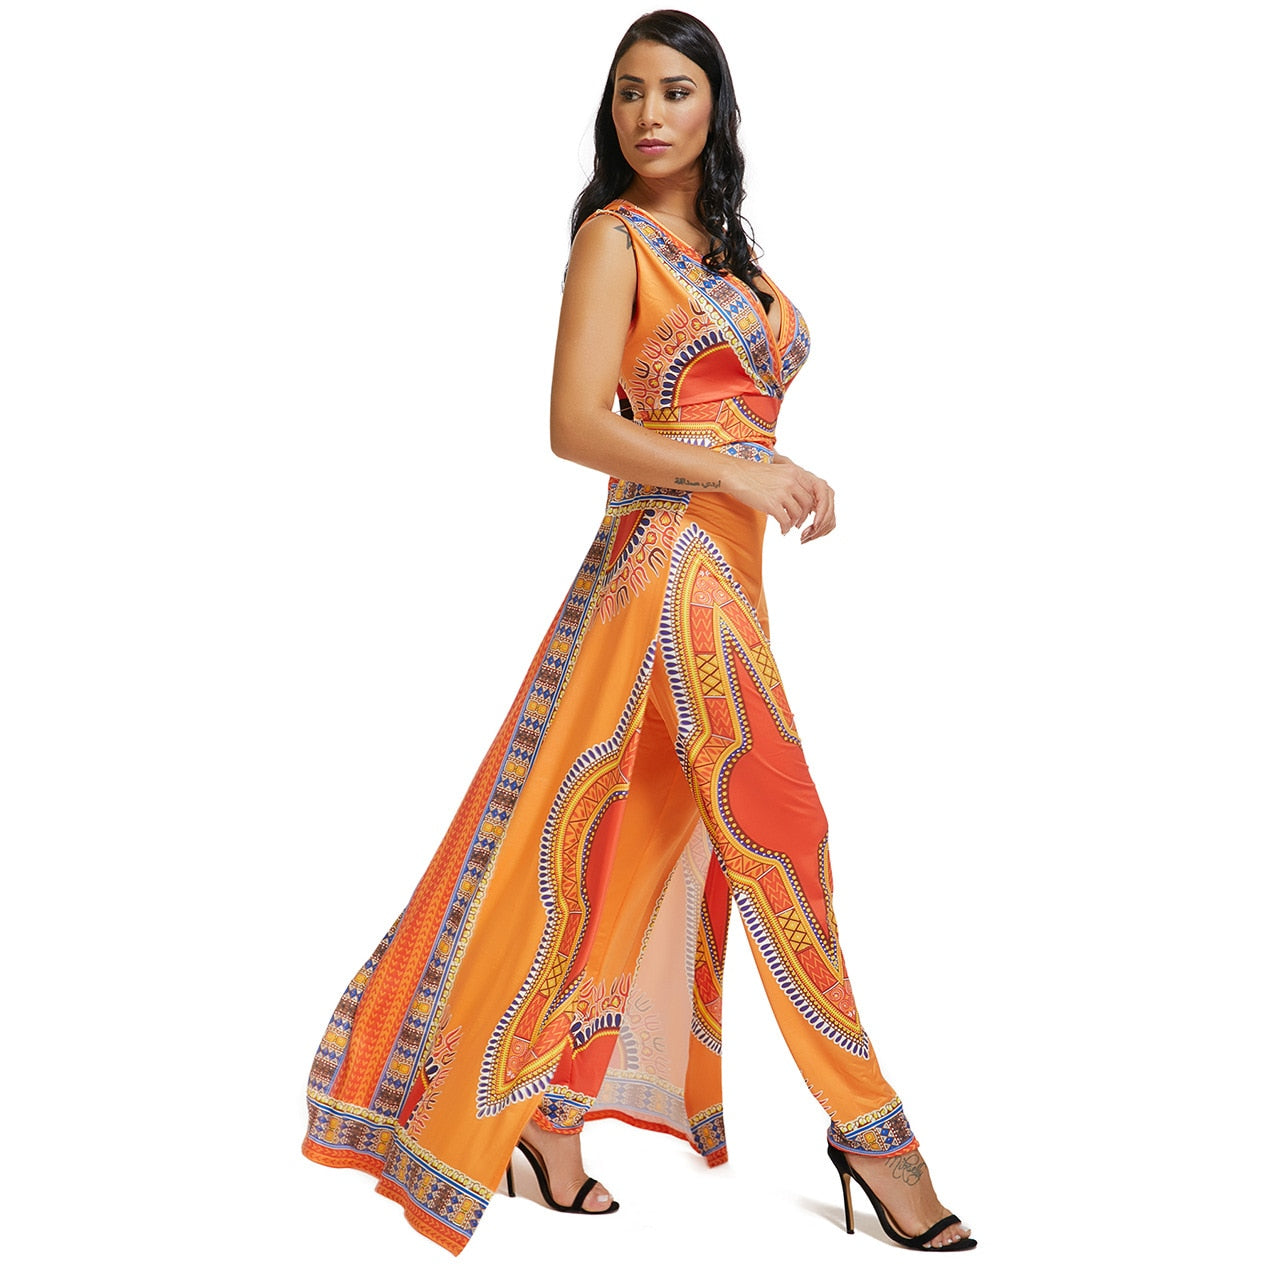 Ethnic Summer Kaftan Set: Vibrant African Print for a Stylish and Comfortable Look - Flexi Africa - Flexi Africa offers Free Delivery Worldwide - Vibrant African traditional clothing showcasing bold prints and intricate designs